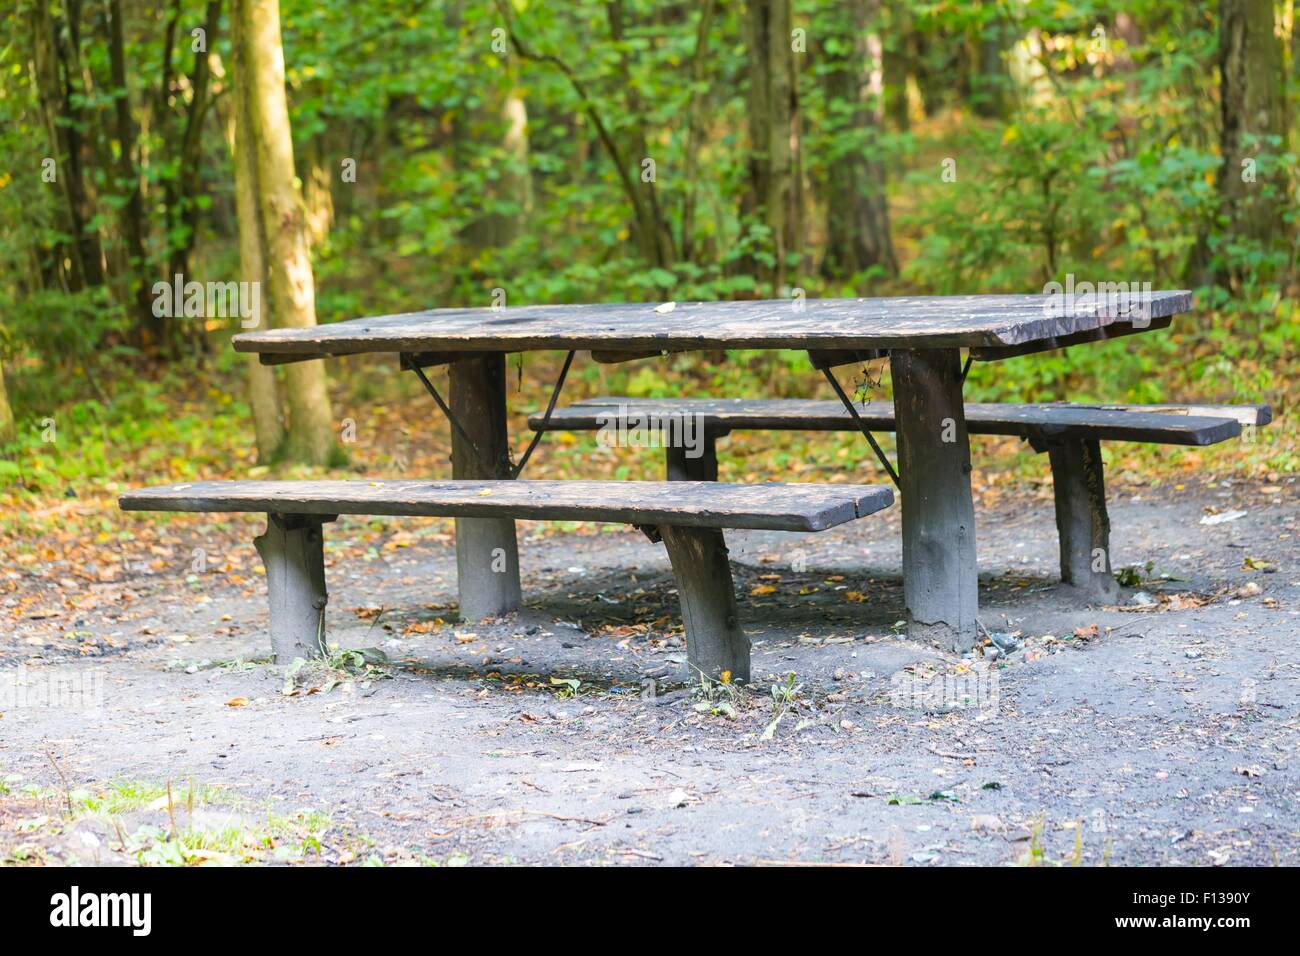 Bench and table in forest. Place for resting for tourists. Natural green forest landscape. Stock Photo